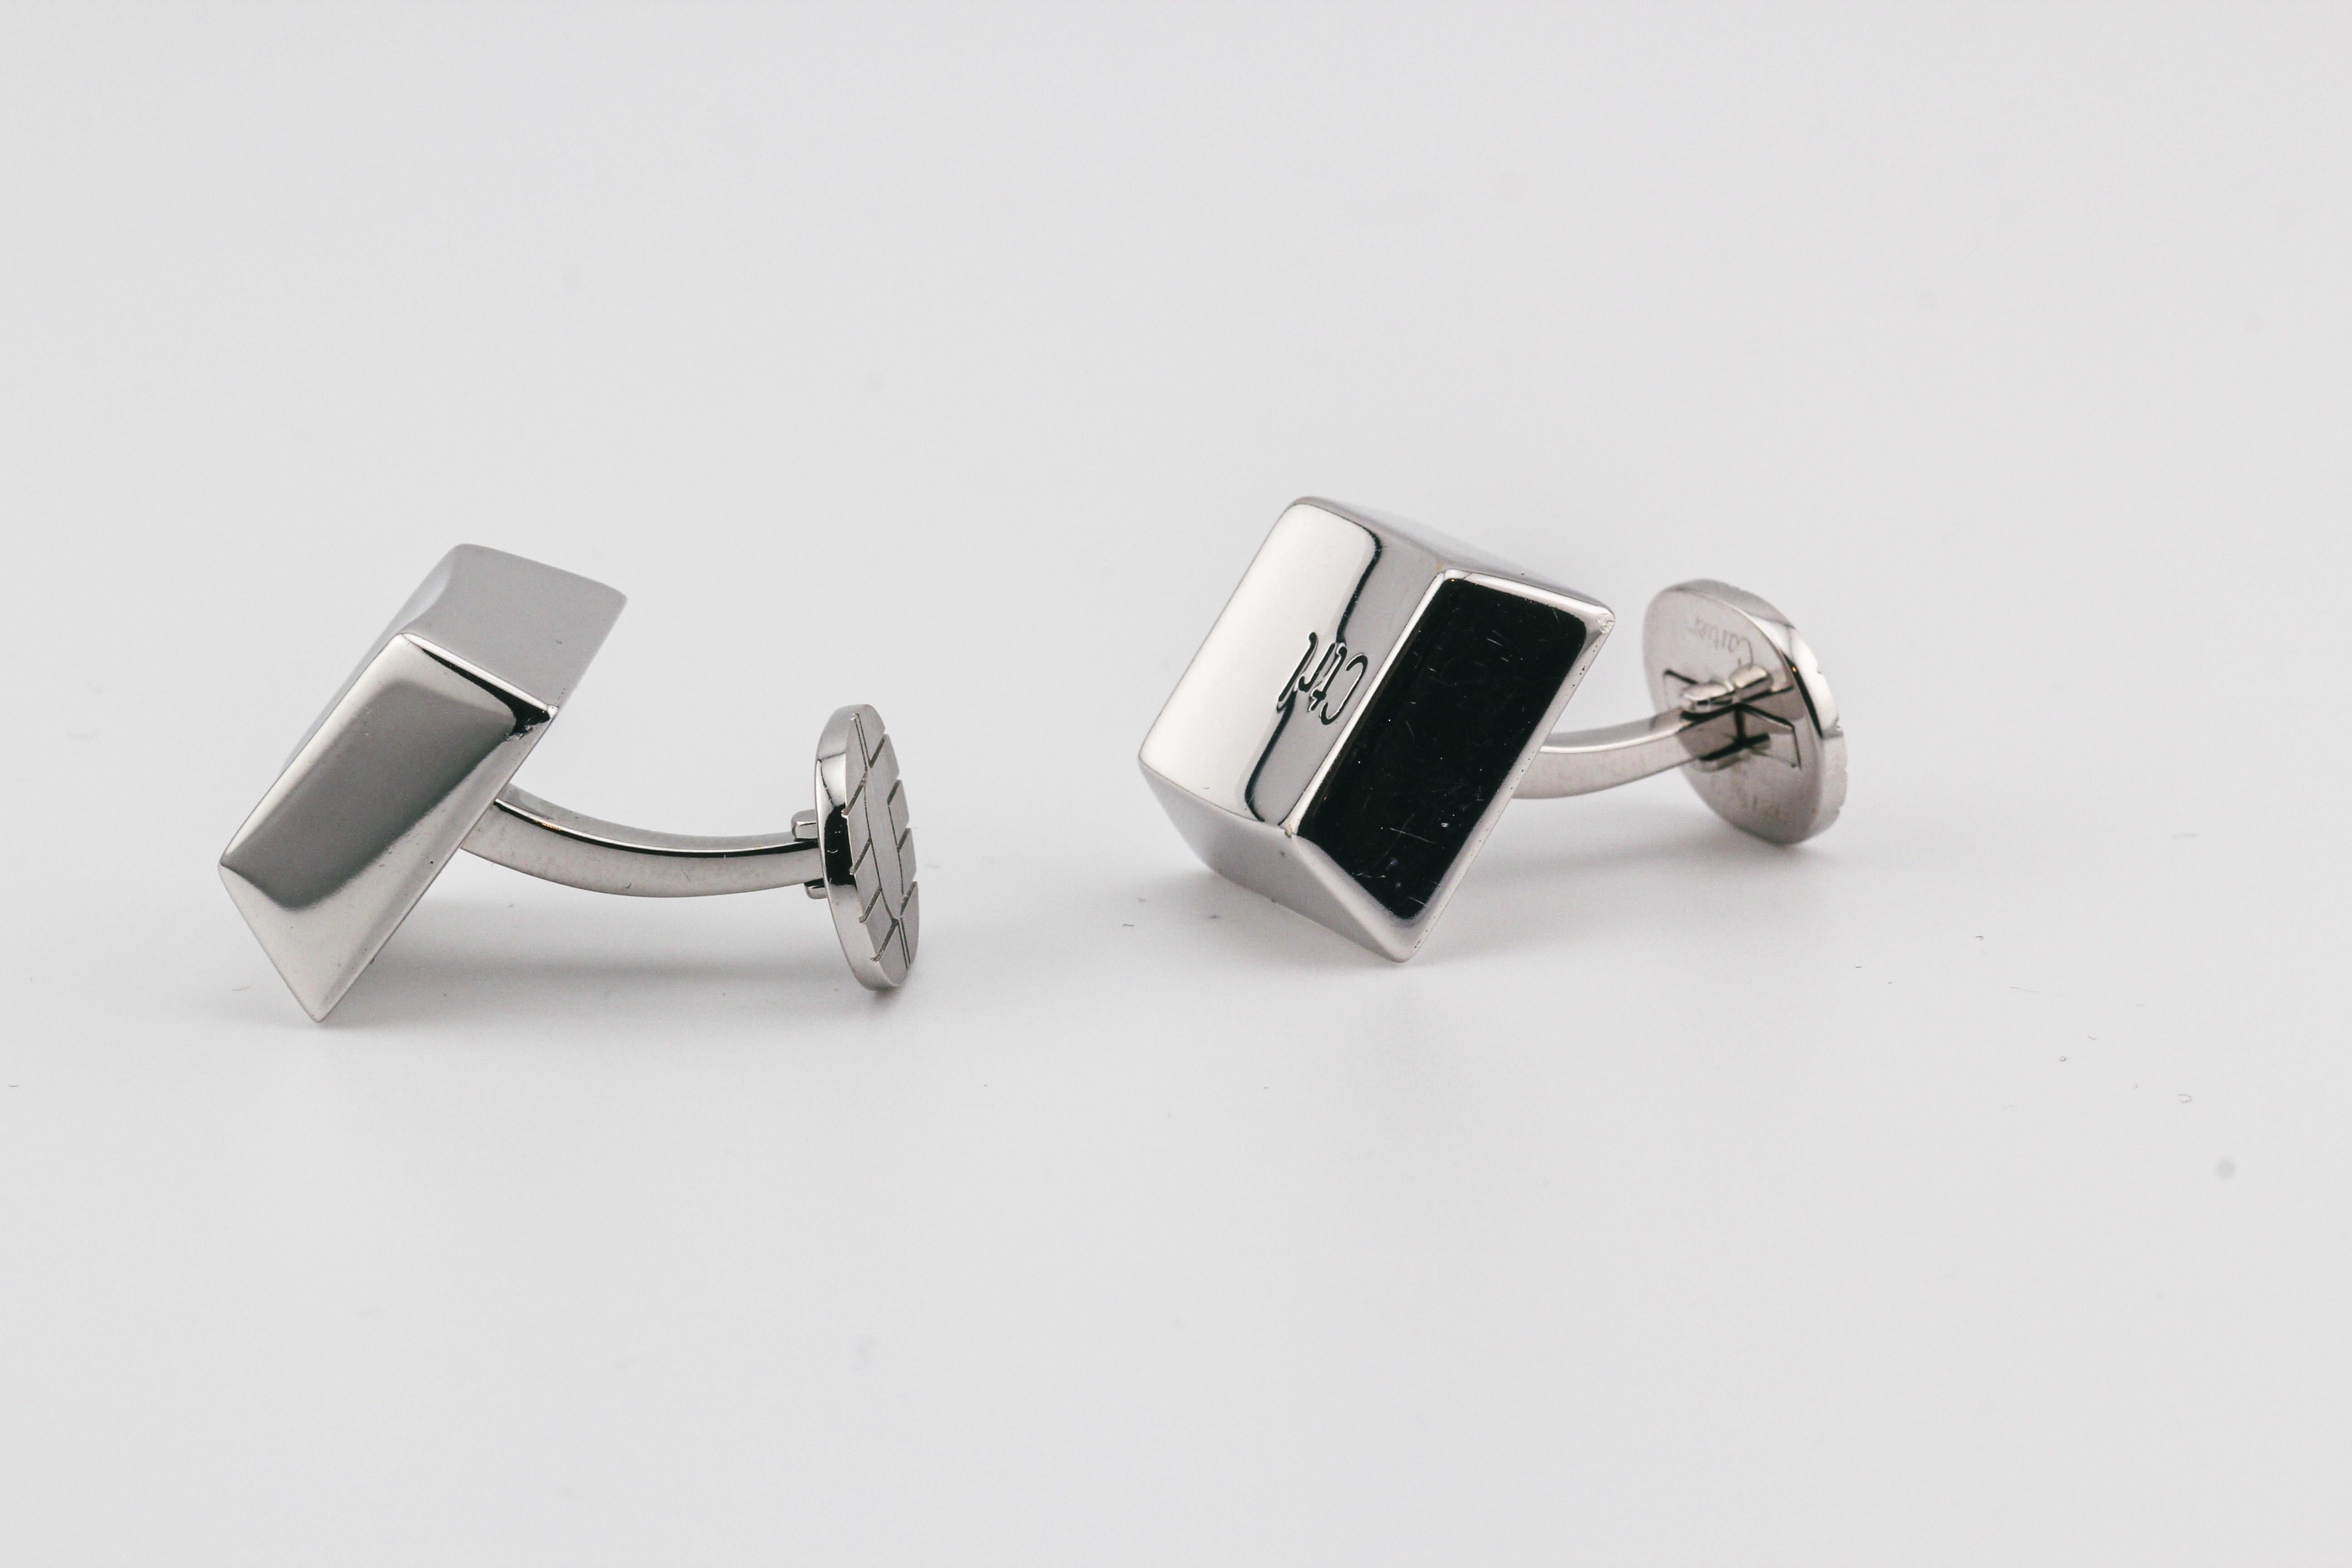 Cartier Computer Keys Ctrl Esc 18k White Gold Cufflinks In Good Condition For Sale In Bellmore, NY